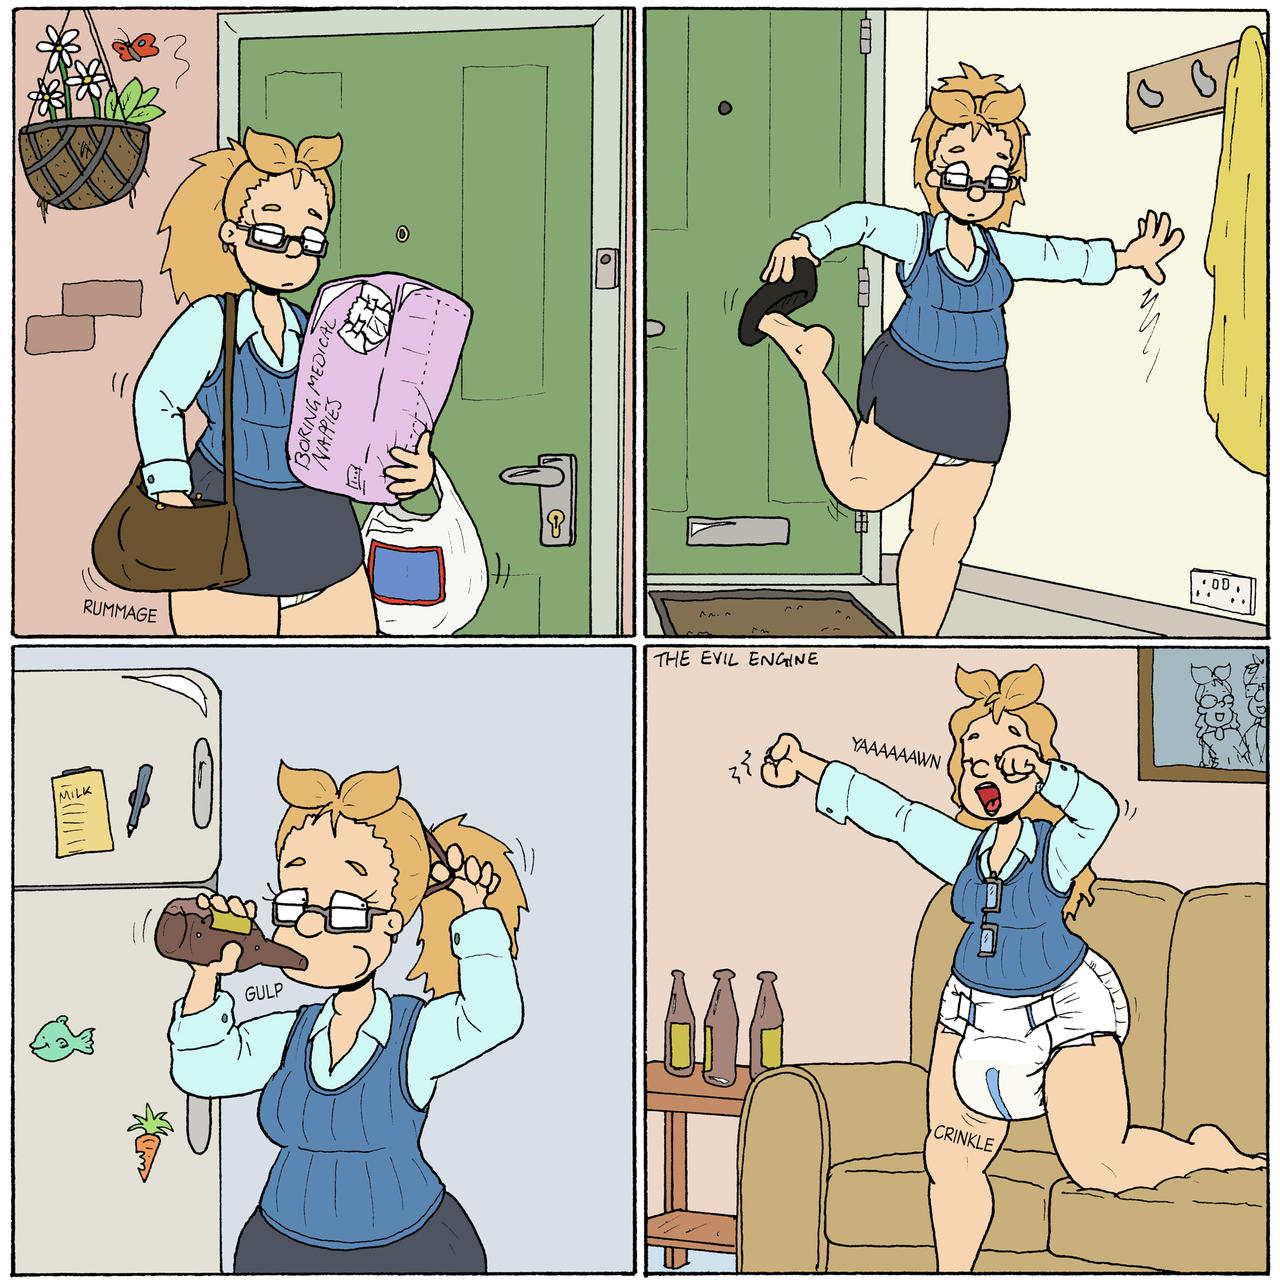 ABDL Back Home From Work by TheEvilEngine on DeviantArt